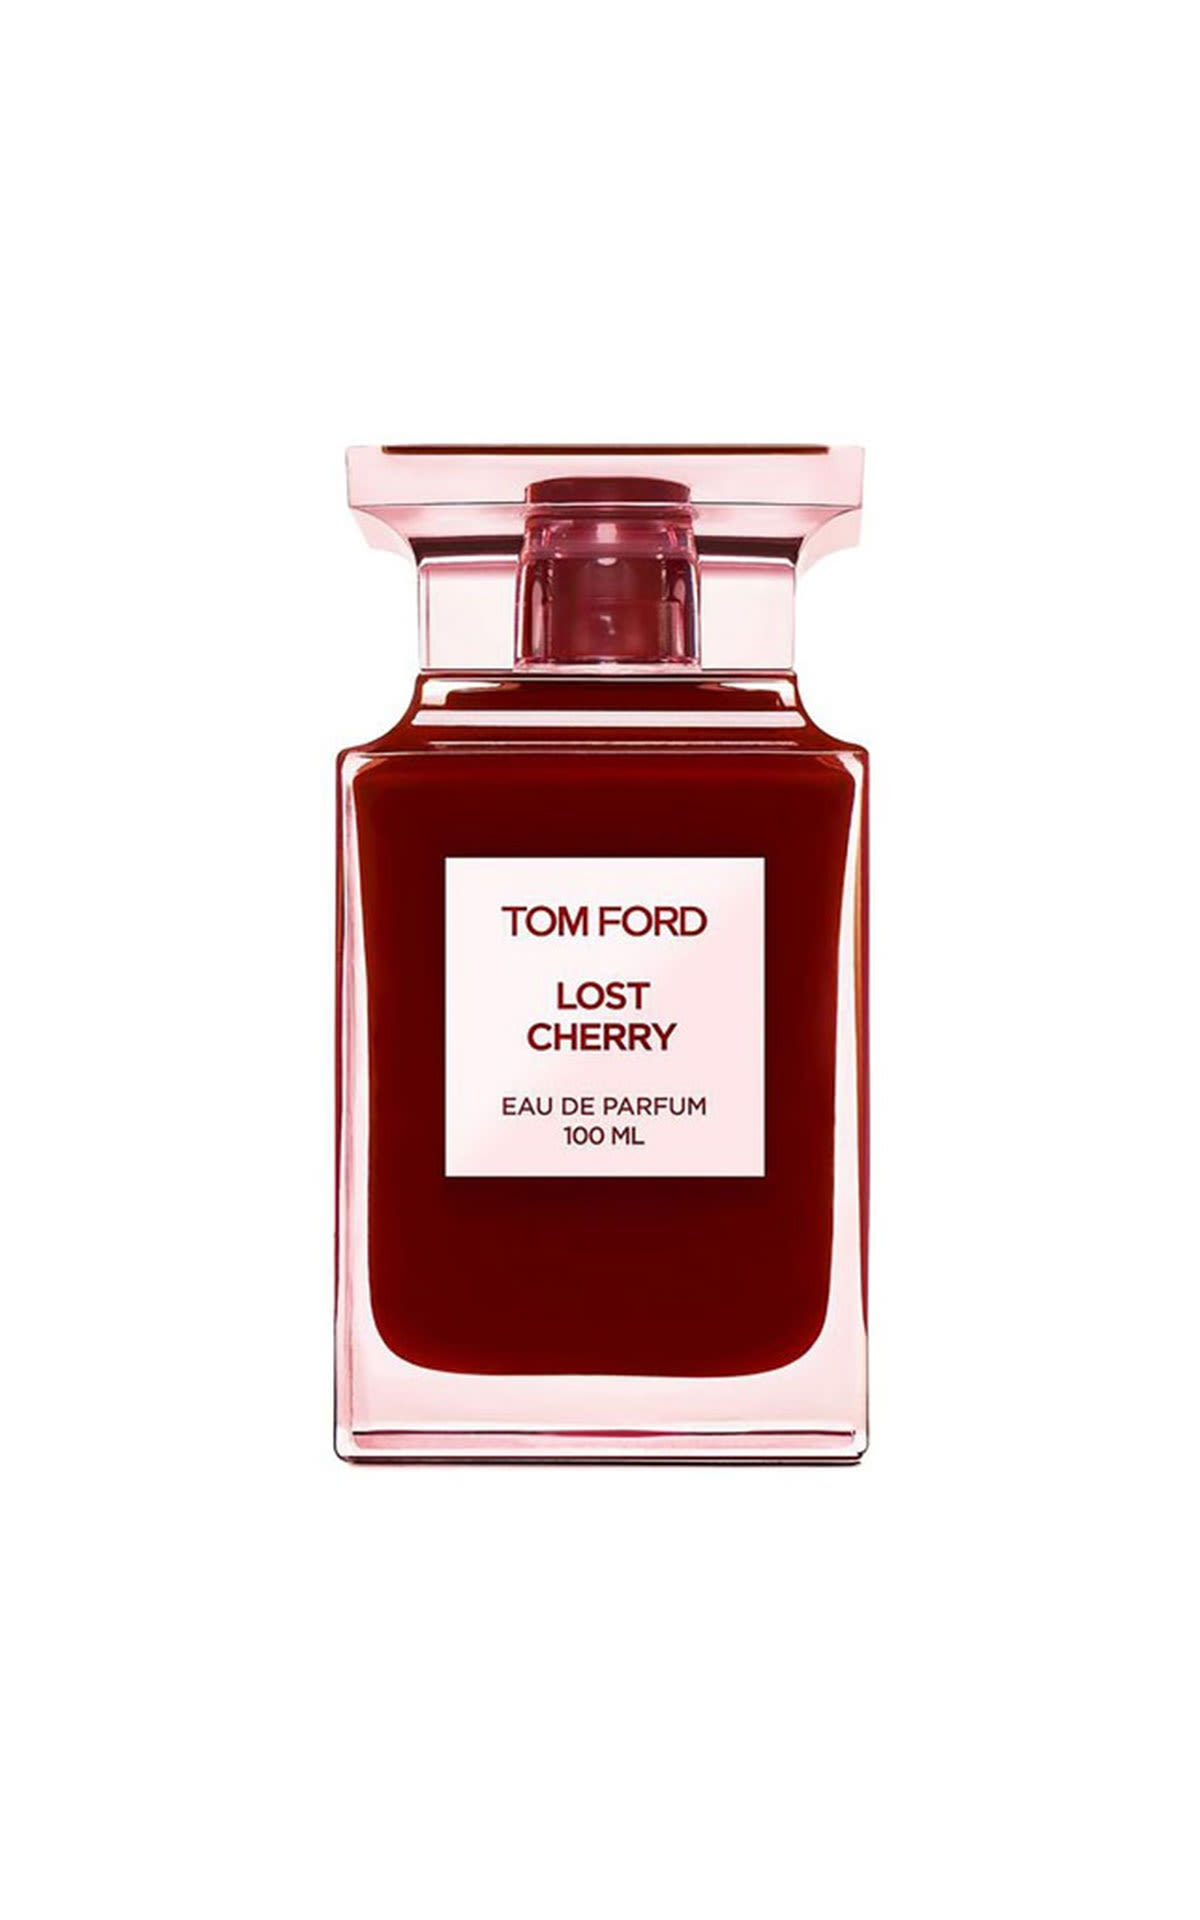 The Cosmetics Company Store Tom Ford Lost cherry eau de parfum spray 100ml from Bicester Village